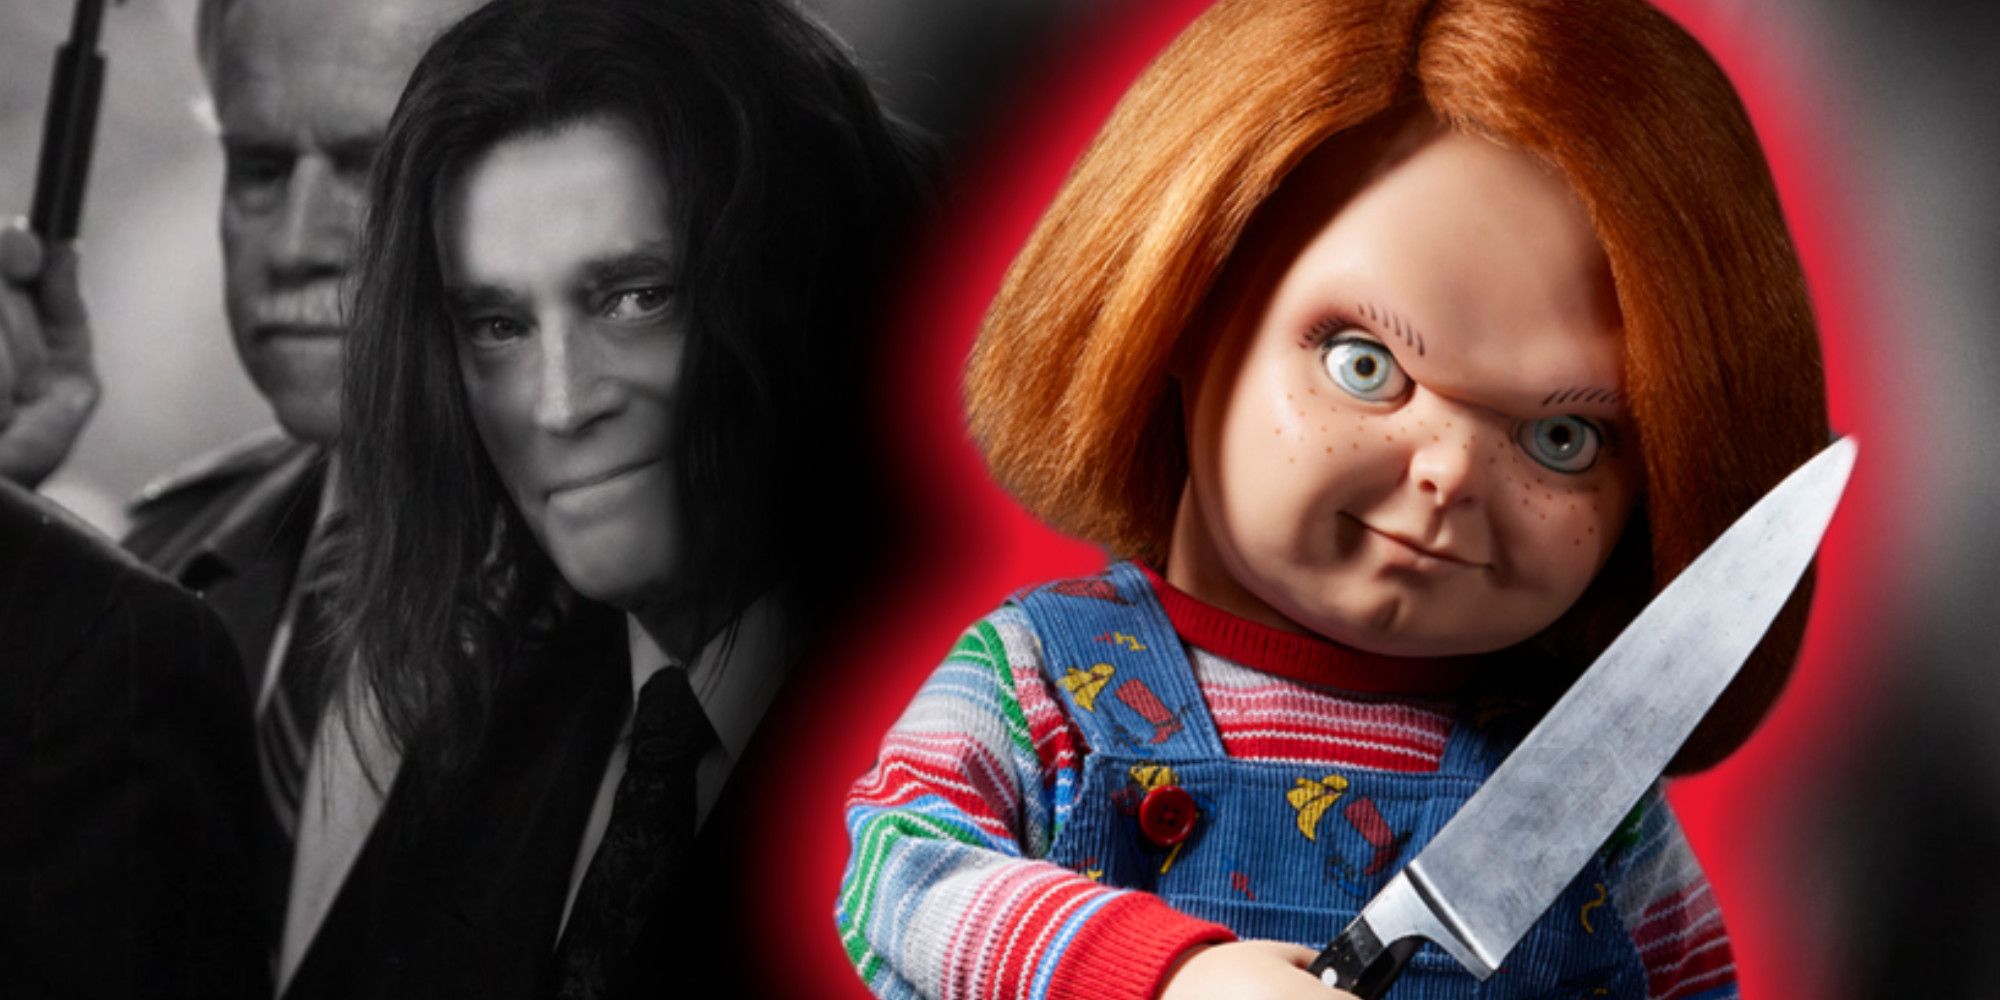 Brad Dourif as Charles Lee Ray and Chucky in Curse of Chucky